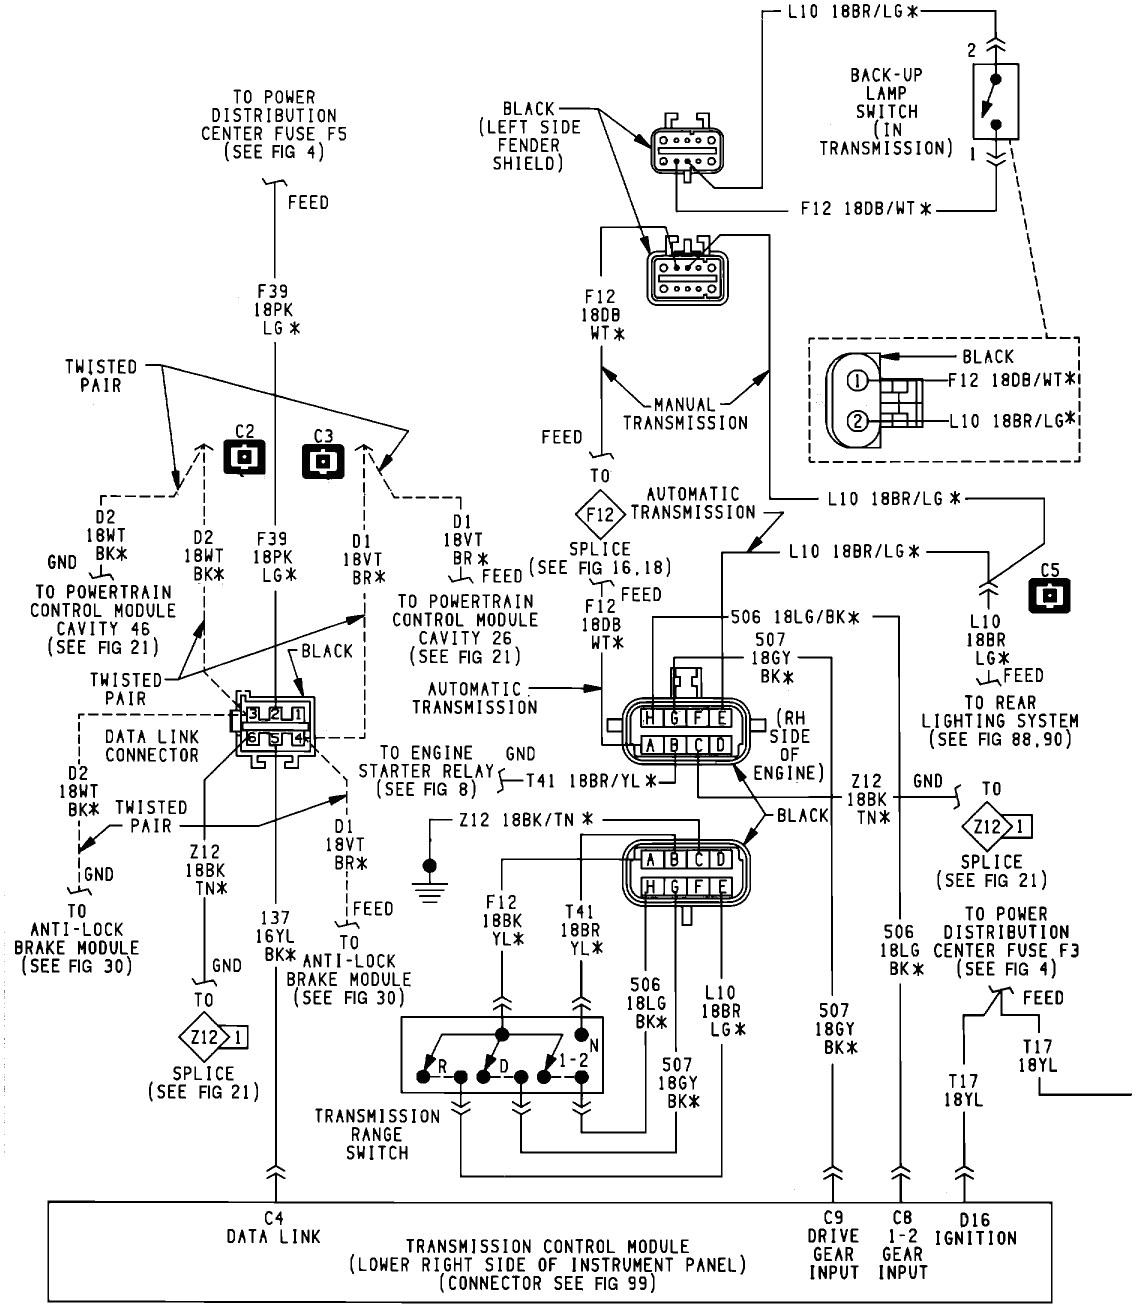 1999 jeep wiring harness wiring diagram database wiring diagram 1999 jeep s turn